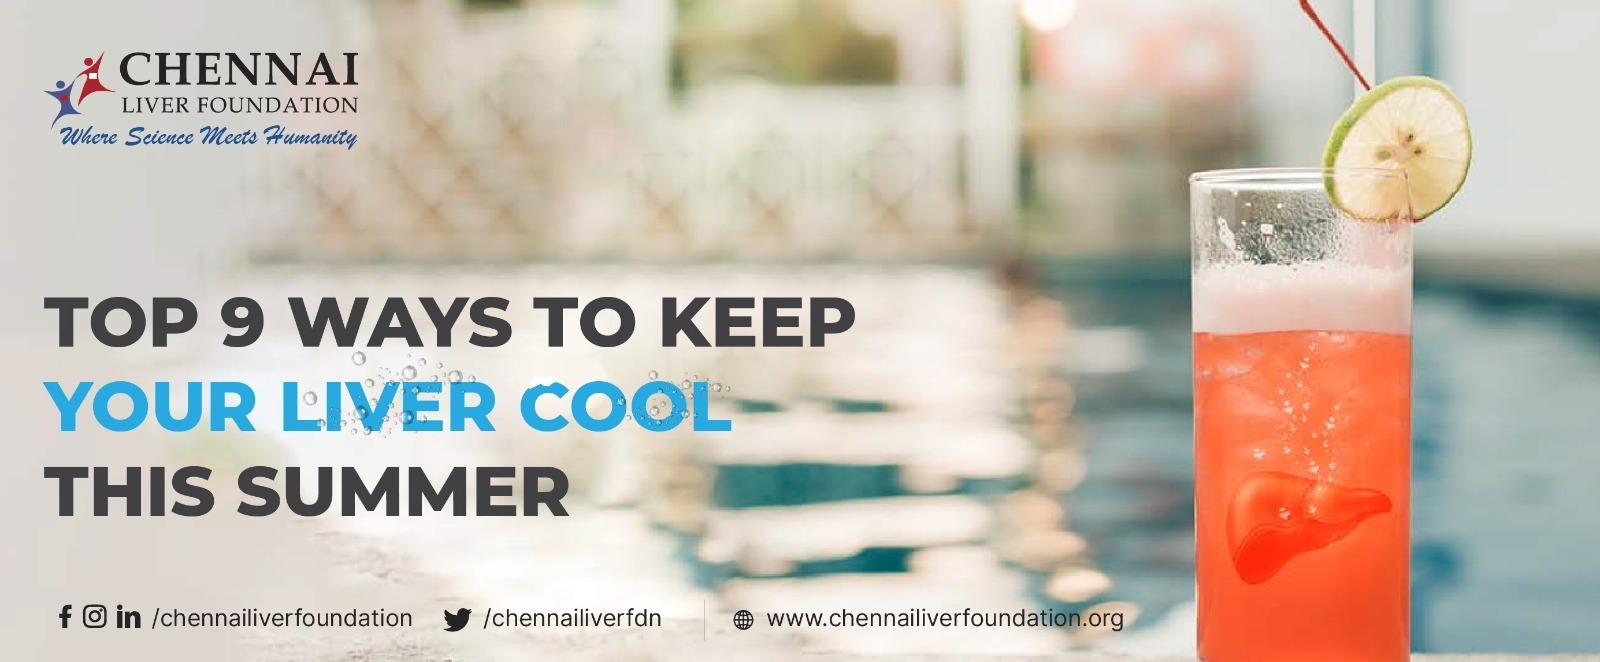 Top 9 Ways to Keep Your Liver Cool This Summer